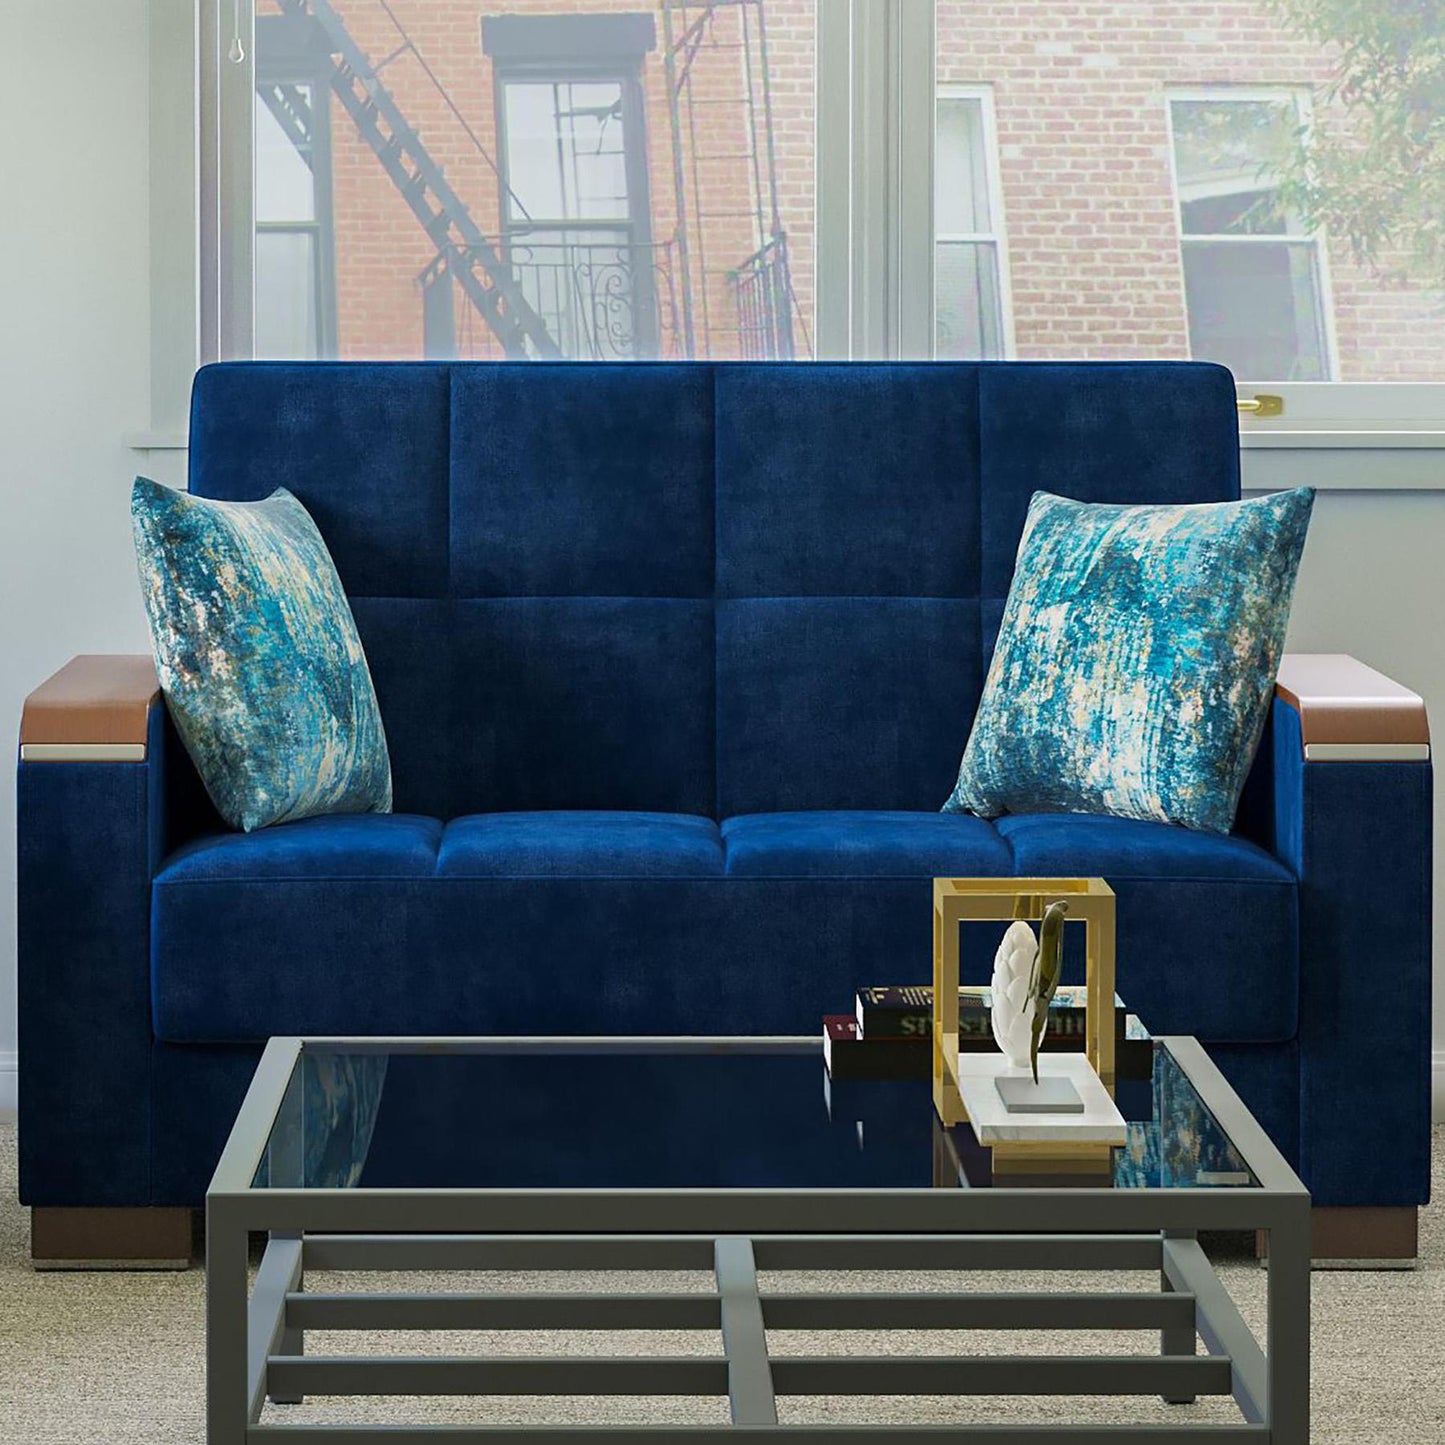 Modern design, True Blue , Microfiber upholstered convertible sleeper Loveseat with underseat storage from Voyage Luxe by Ottomanson in living room lifestyle setting by itself. This Loveseat measures 67 inches width by 36 inches depth by 41 inches height.